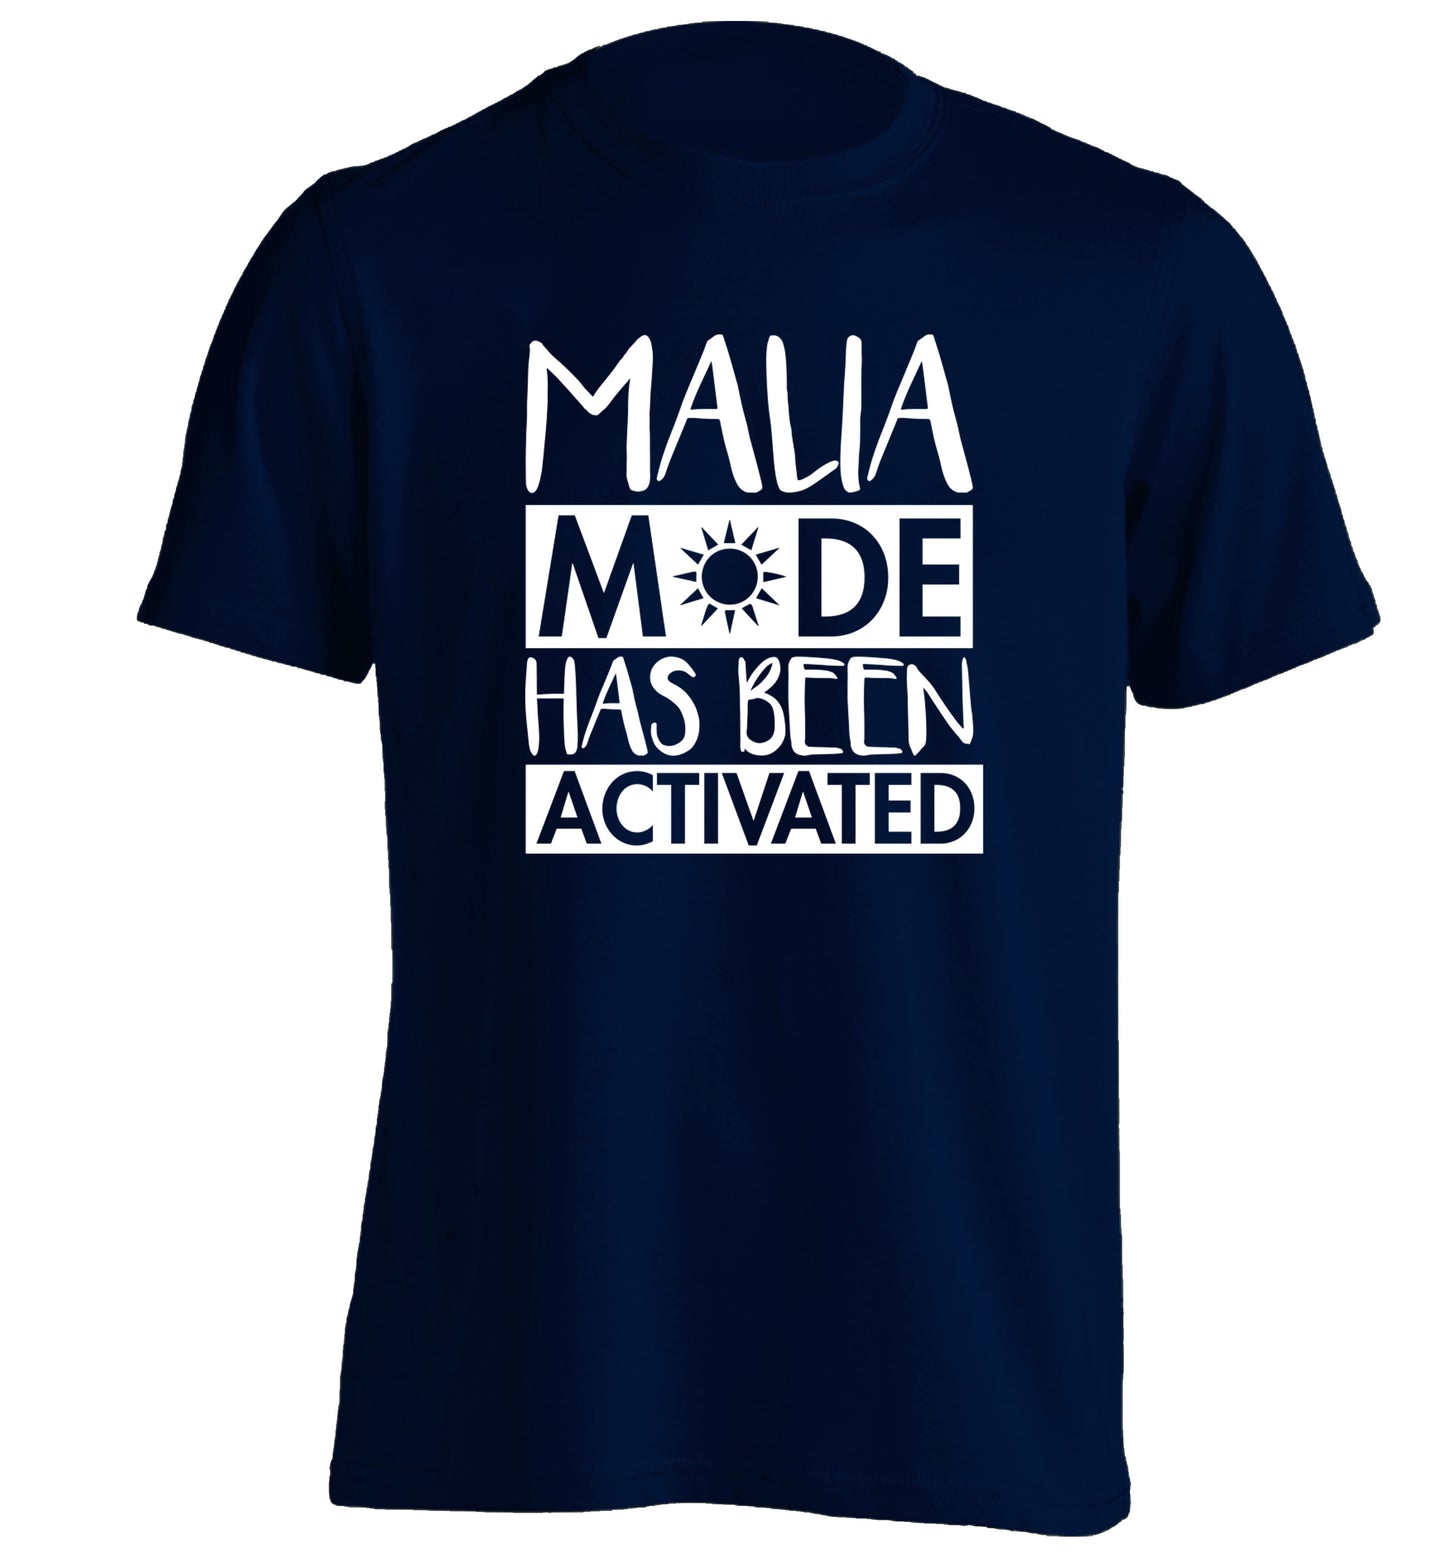 Malia mode has been activated adults unisex navy Tshirt 2XL